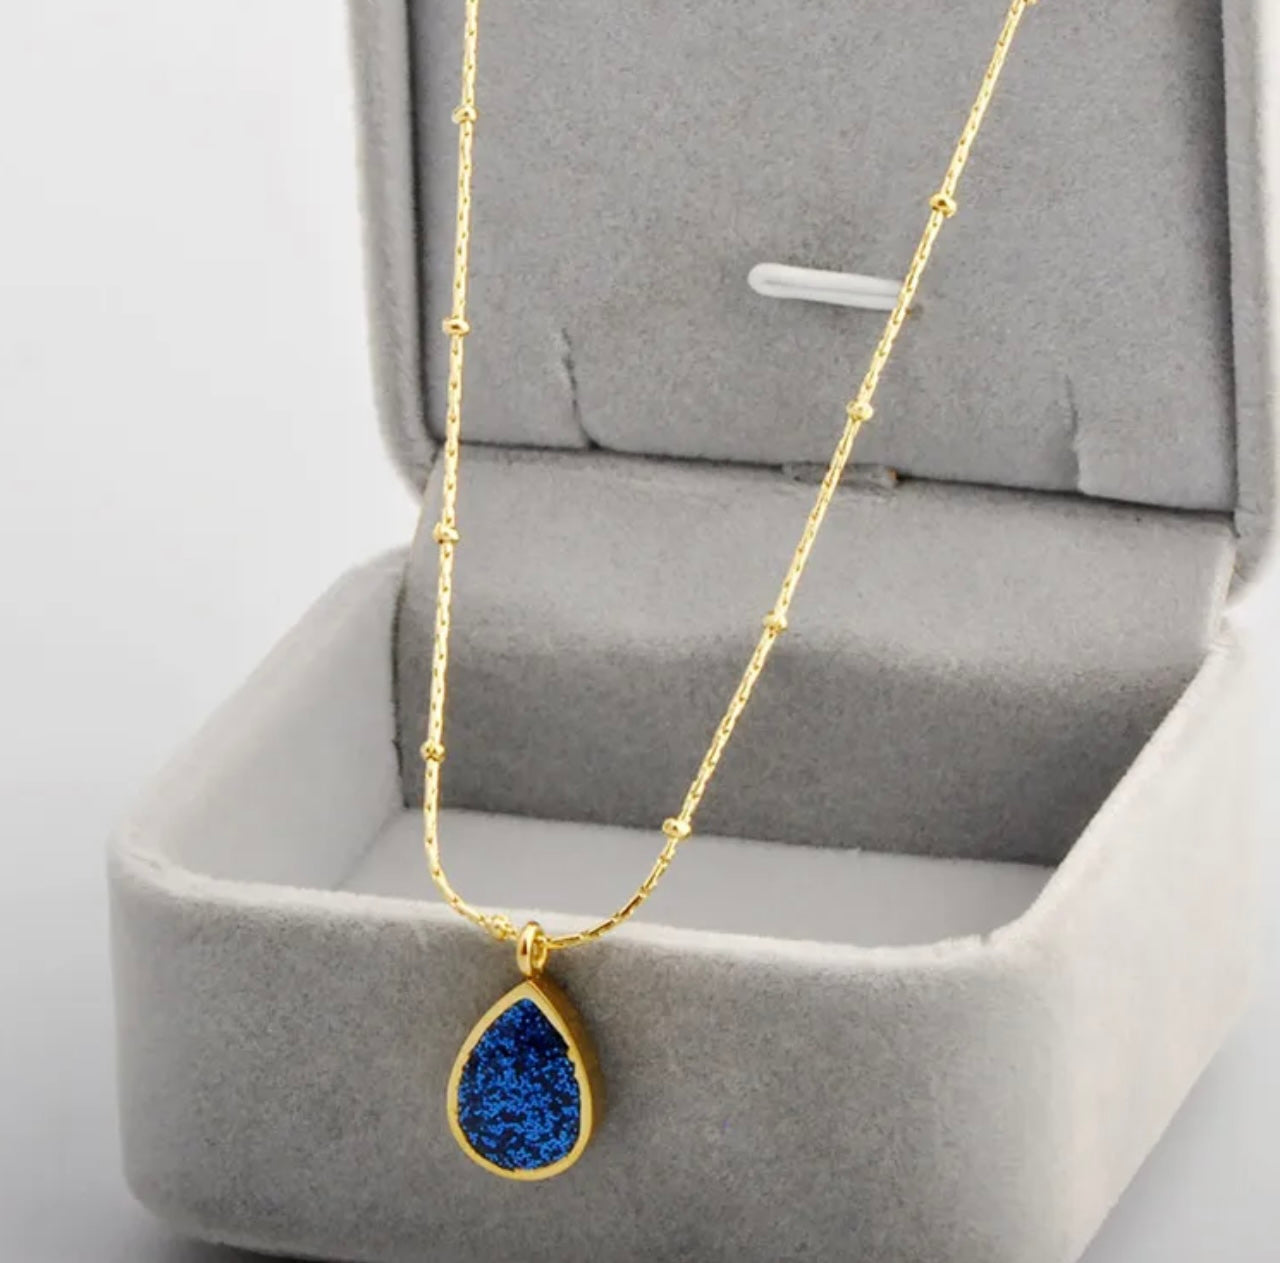 Water Droplet Necklace